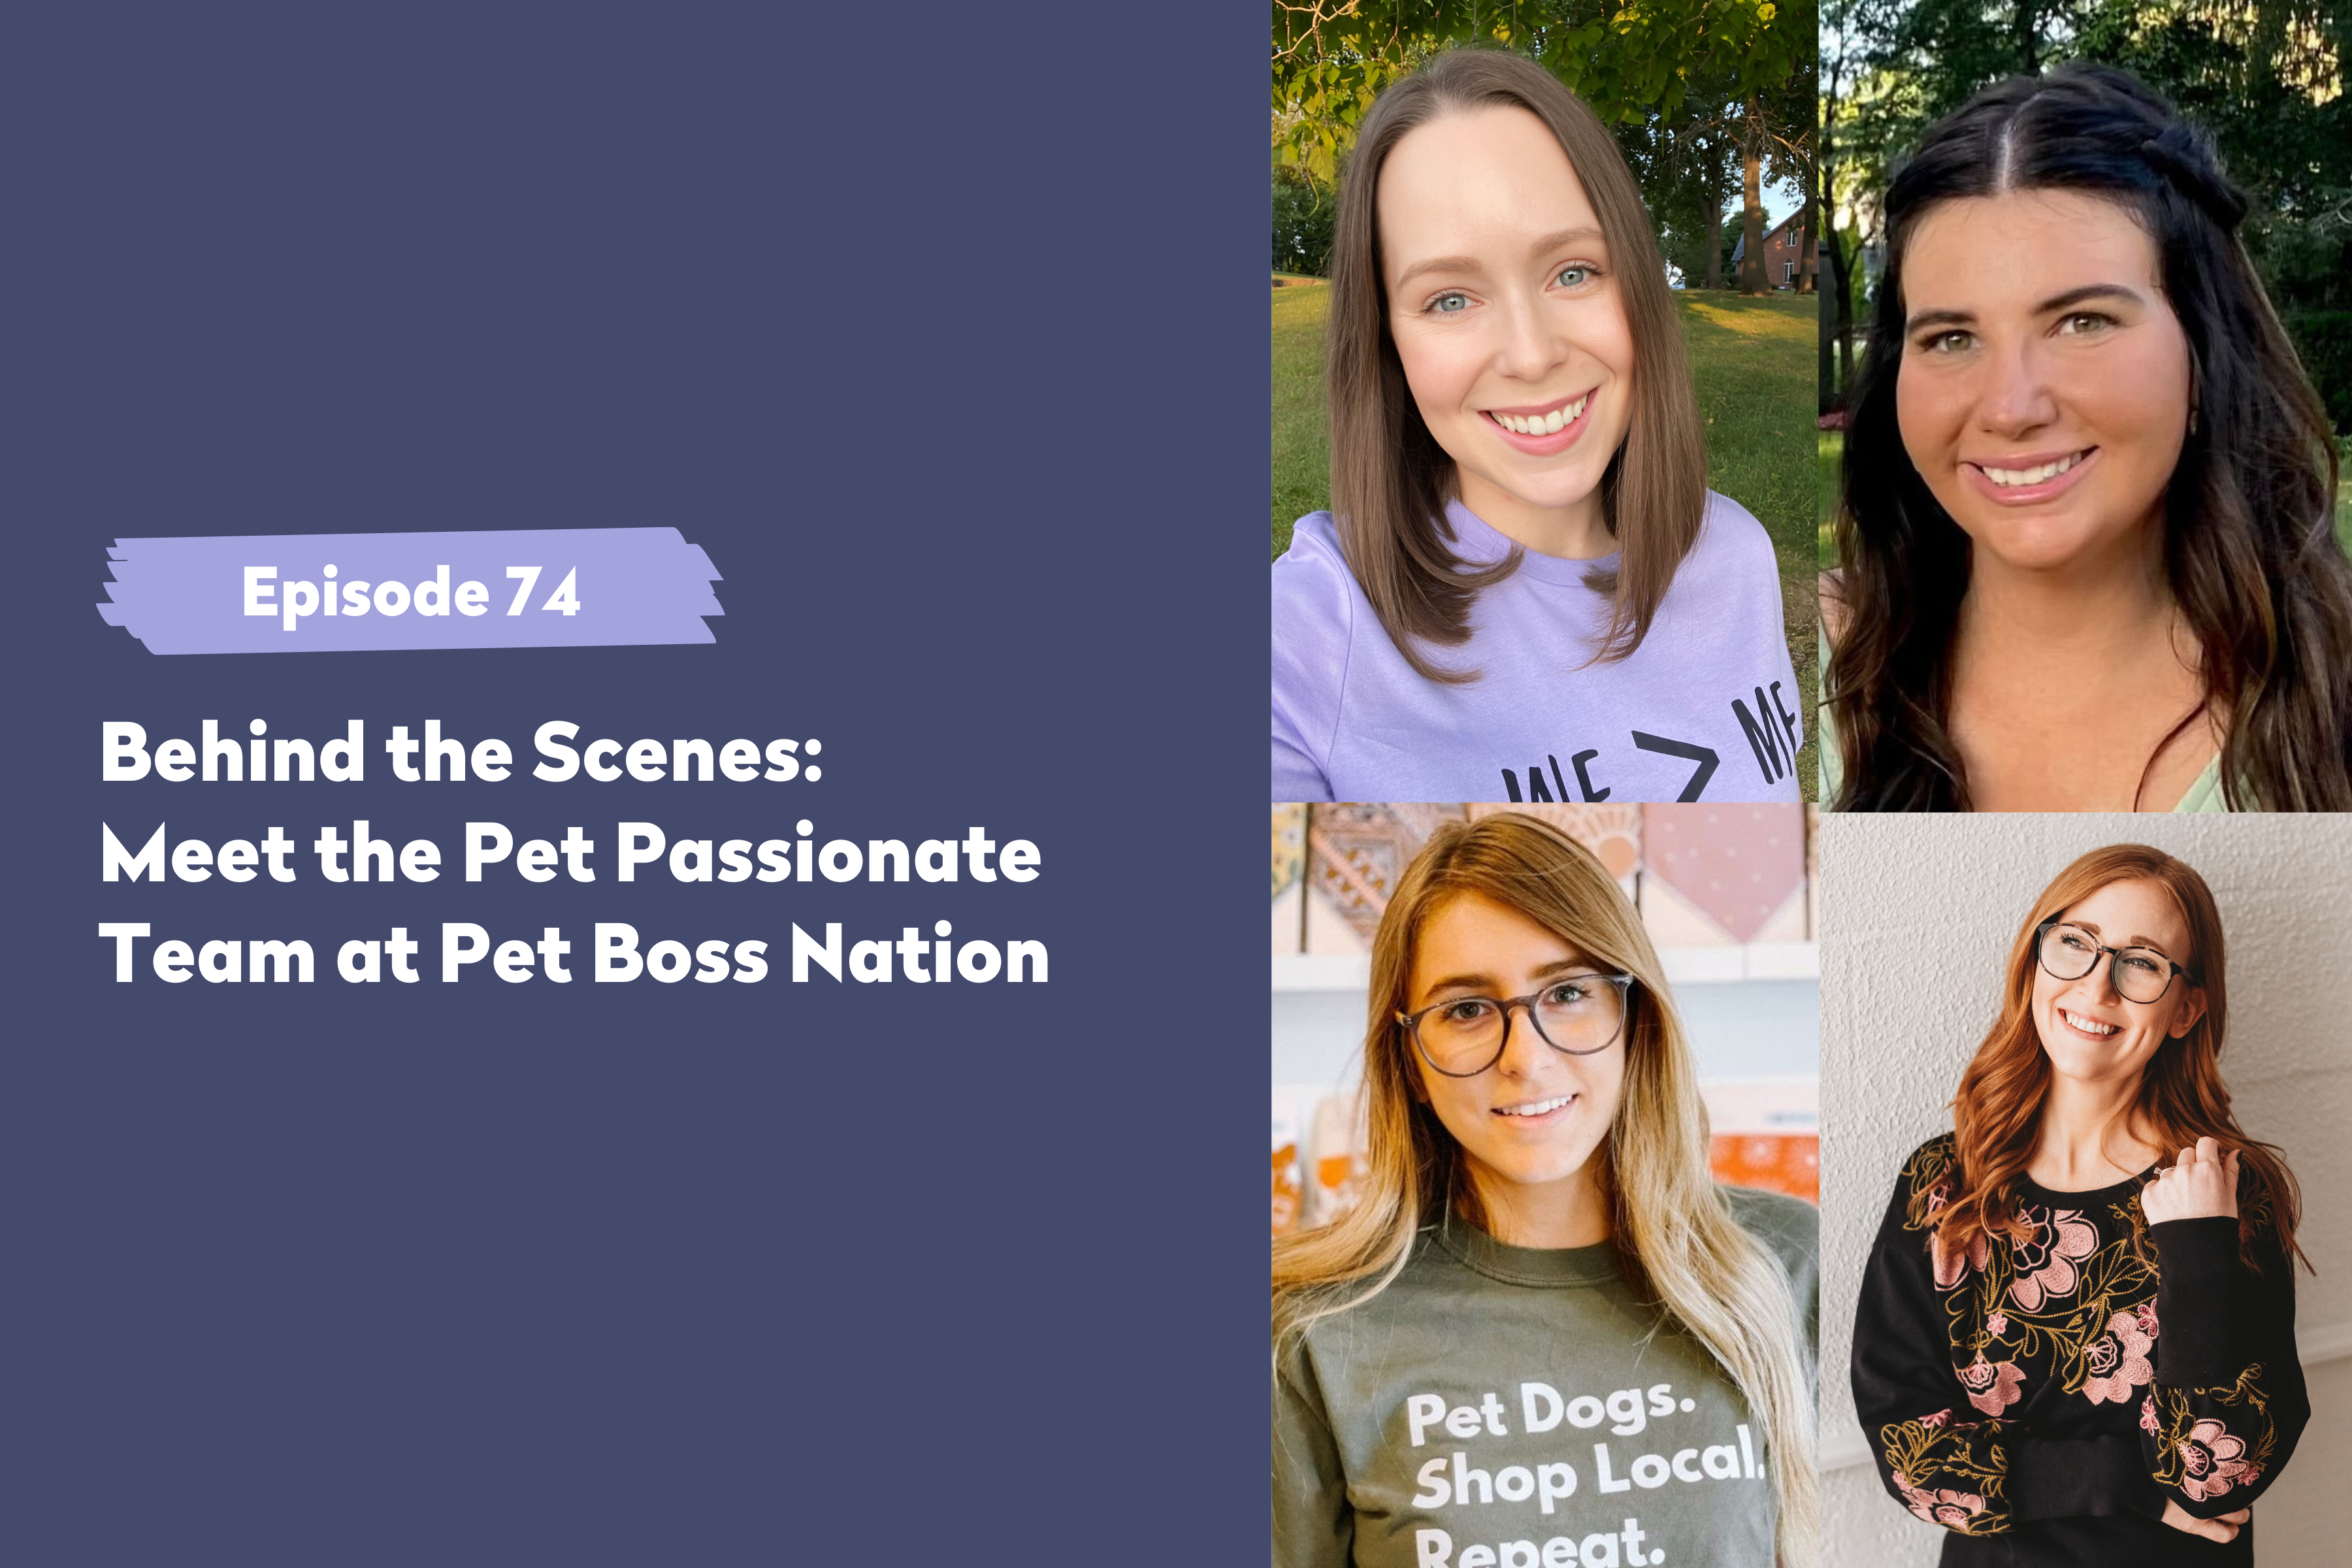 Episode 74 | Behind the Scenes: Meet the Pet Passionate Team at Pet Boss Nation